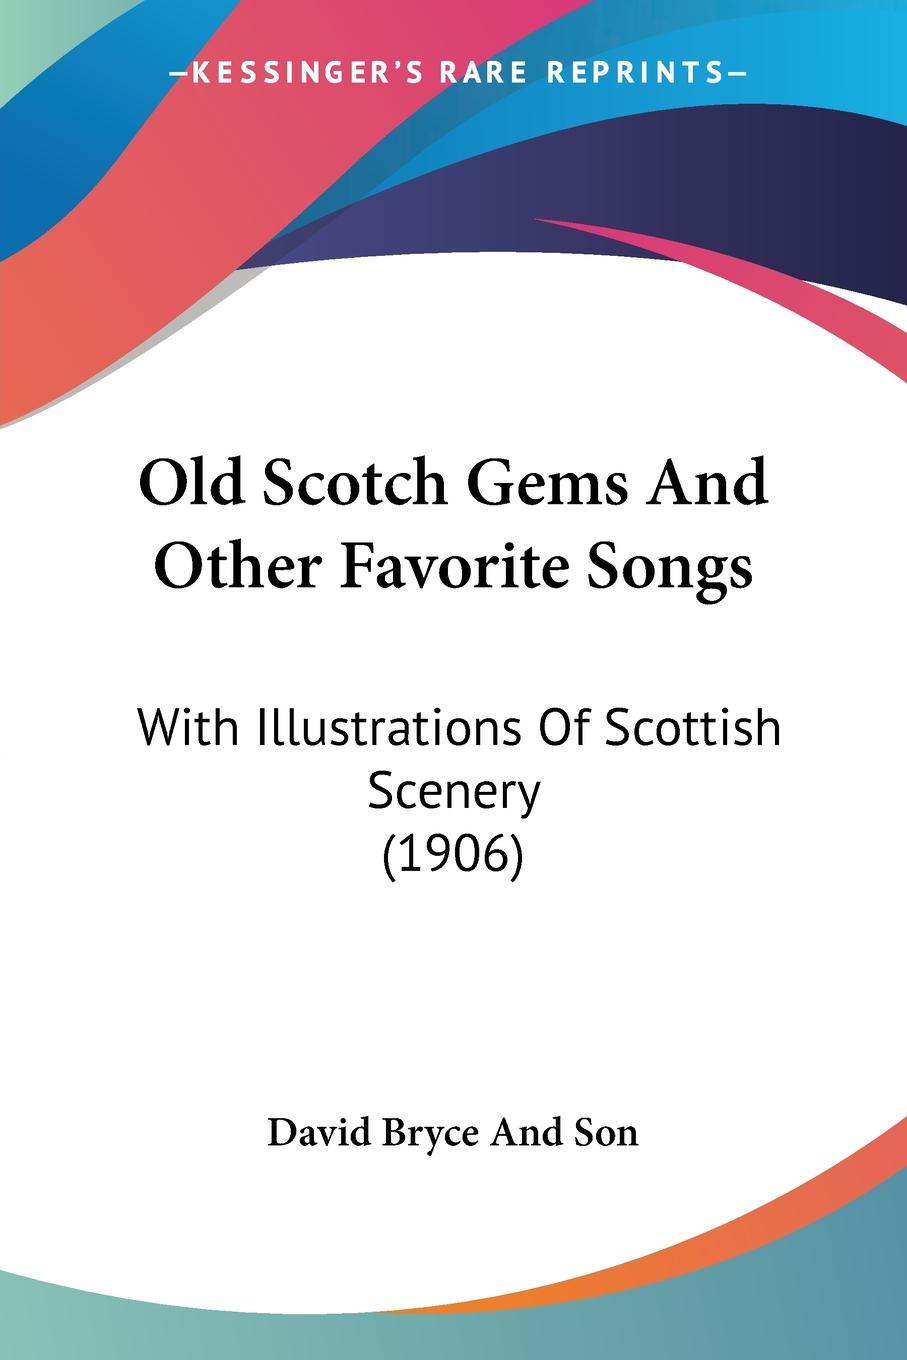 Old Scotch Gems And Other Favorite Songs - David Bryce And Son